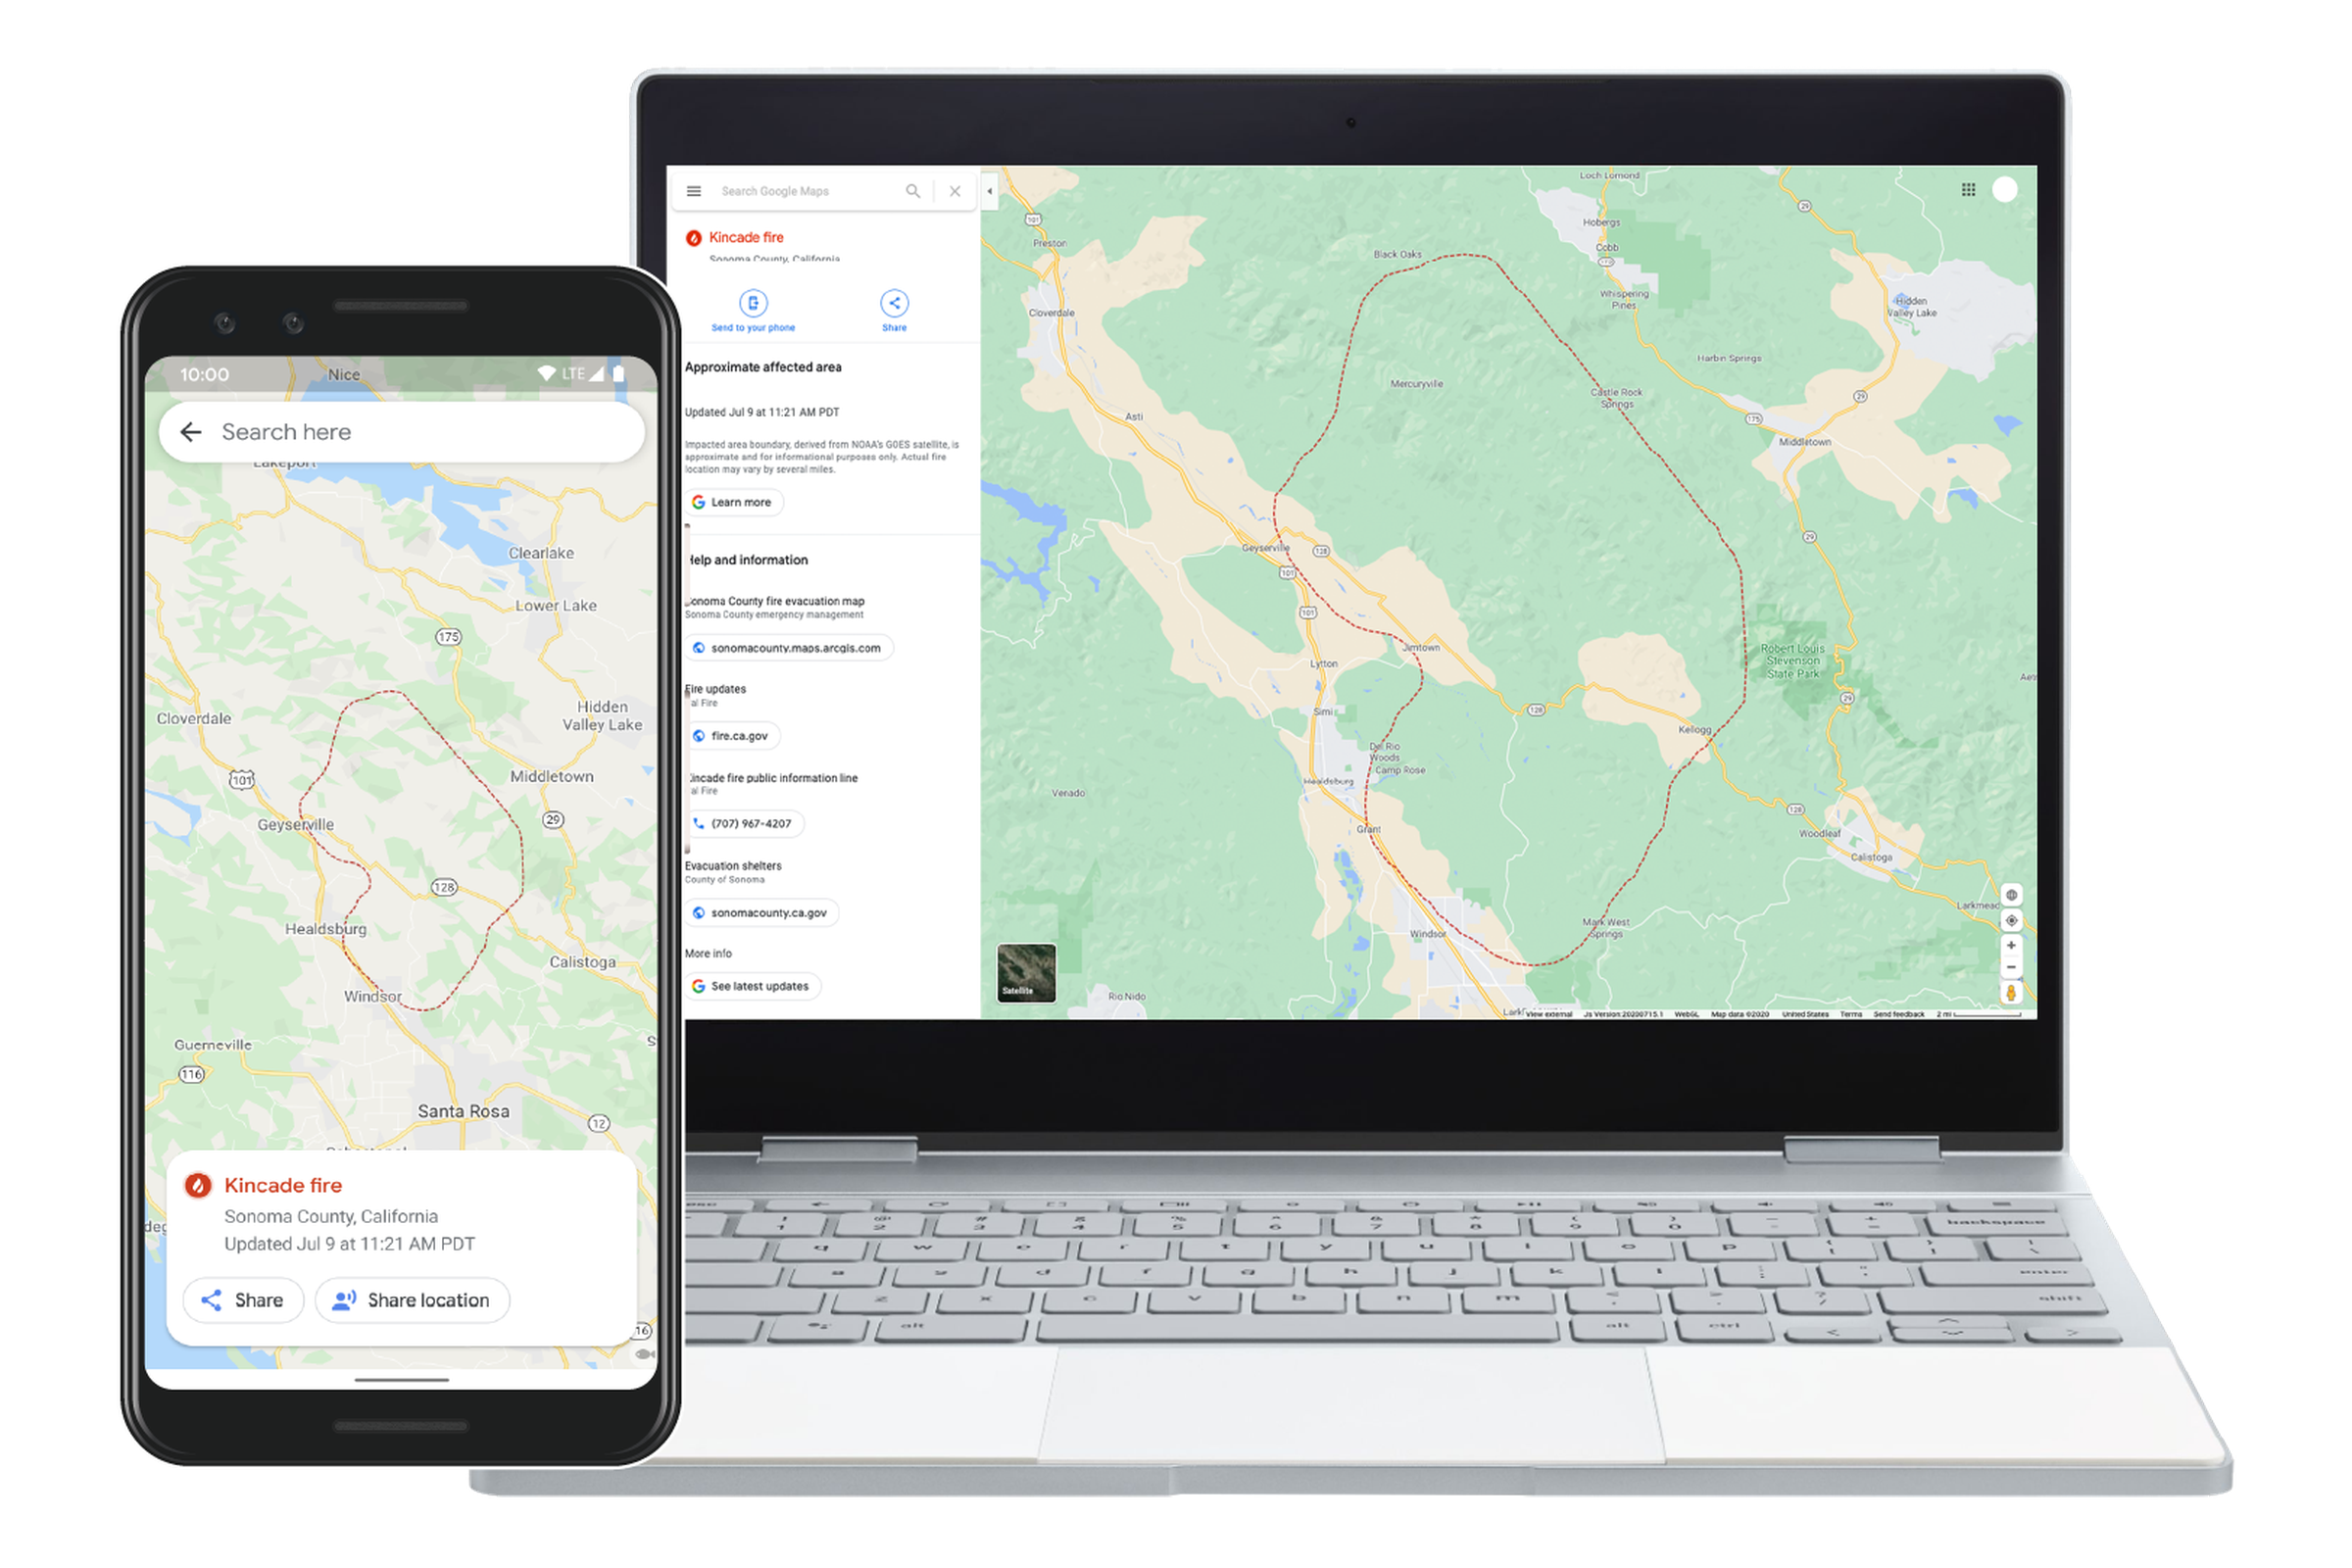 Google’s new wildfire mapping feature includes wildfire boundaries, top news stories, and official updates.